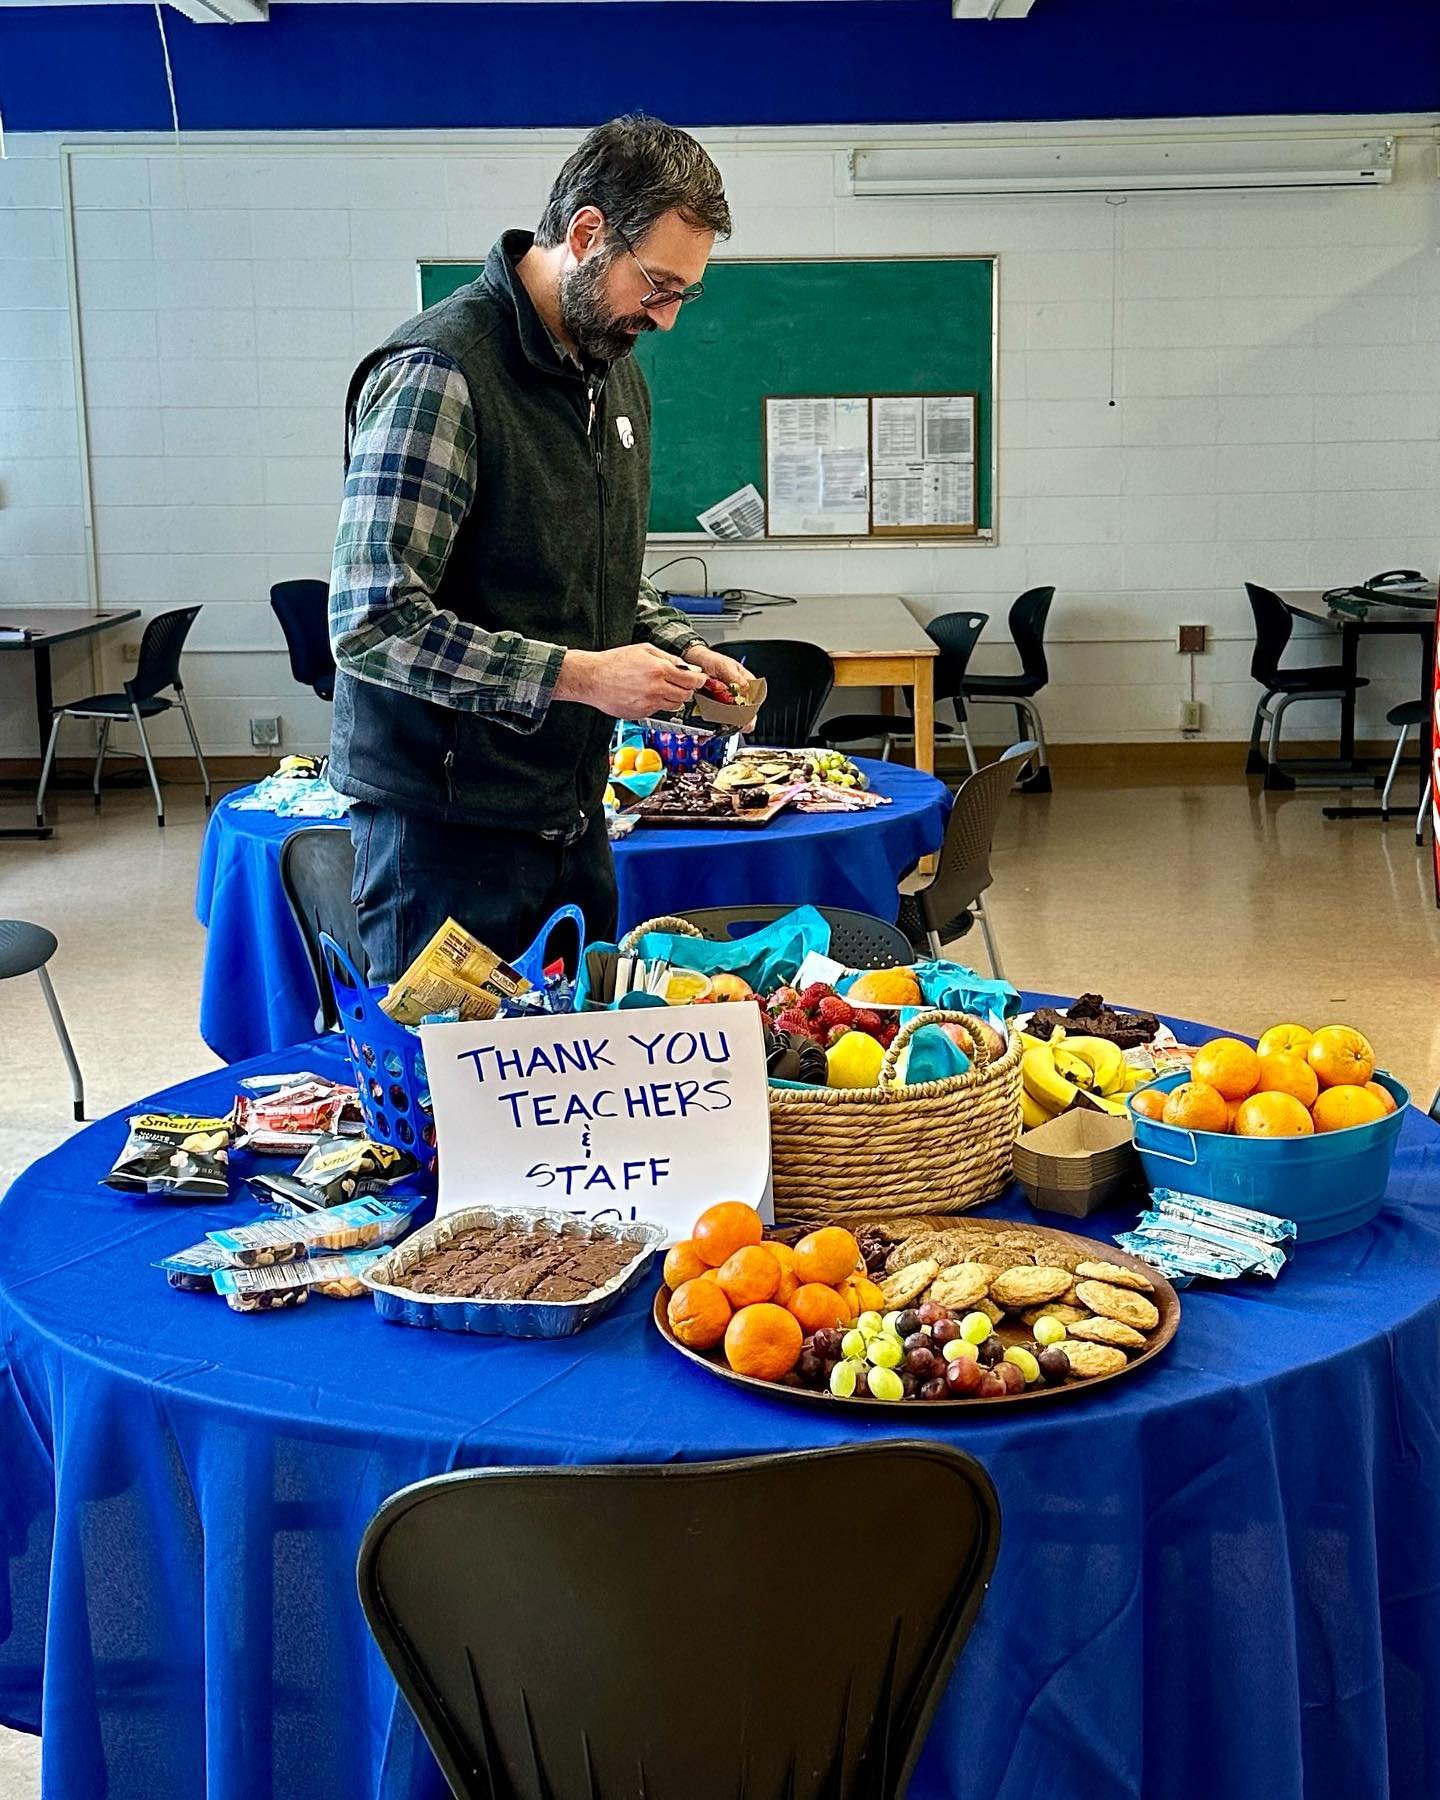 Thank you to everyone who brought treats for today! And to those who volunteered to help show our appreciation for our amazing staff!! 

We need a little more help for Friday - sign-up link in bio!